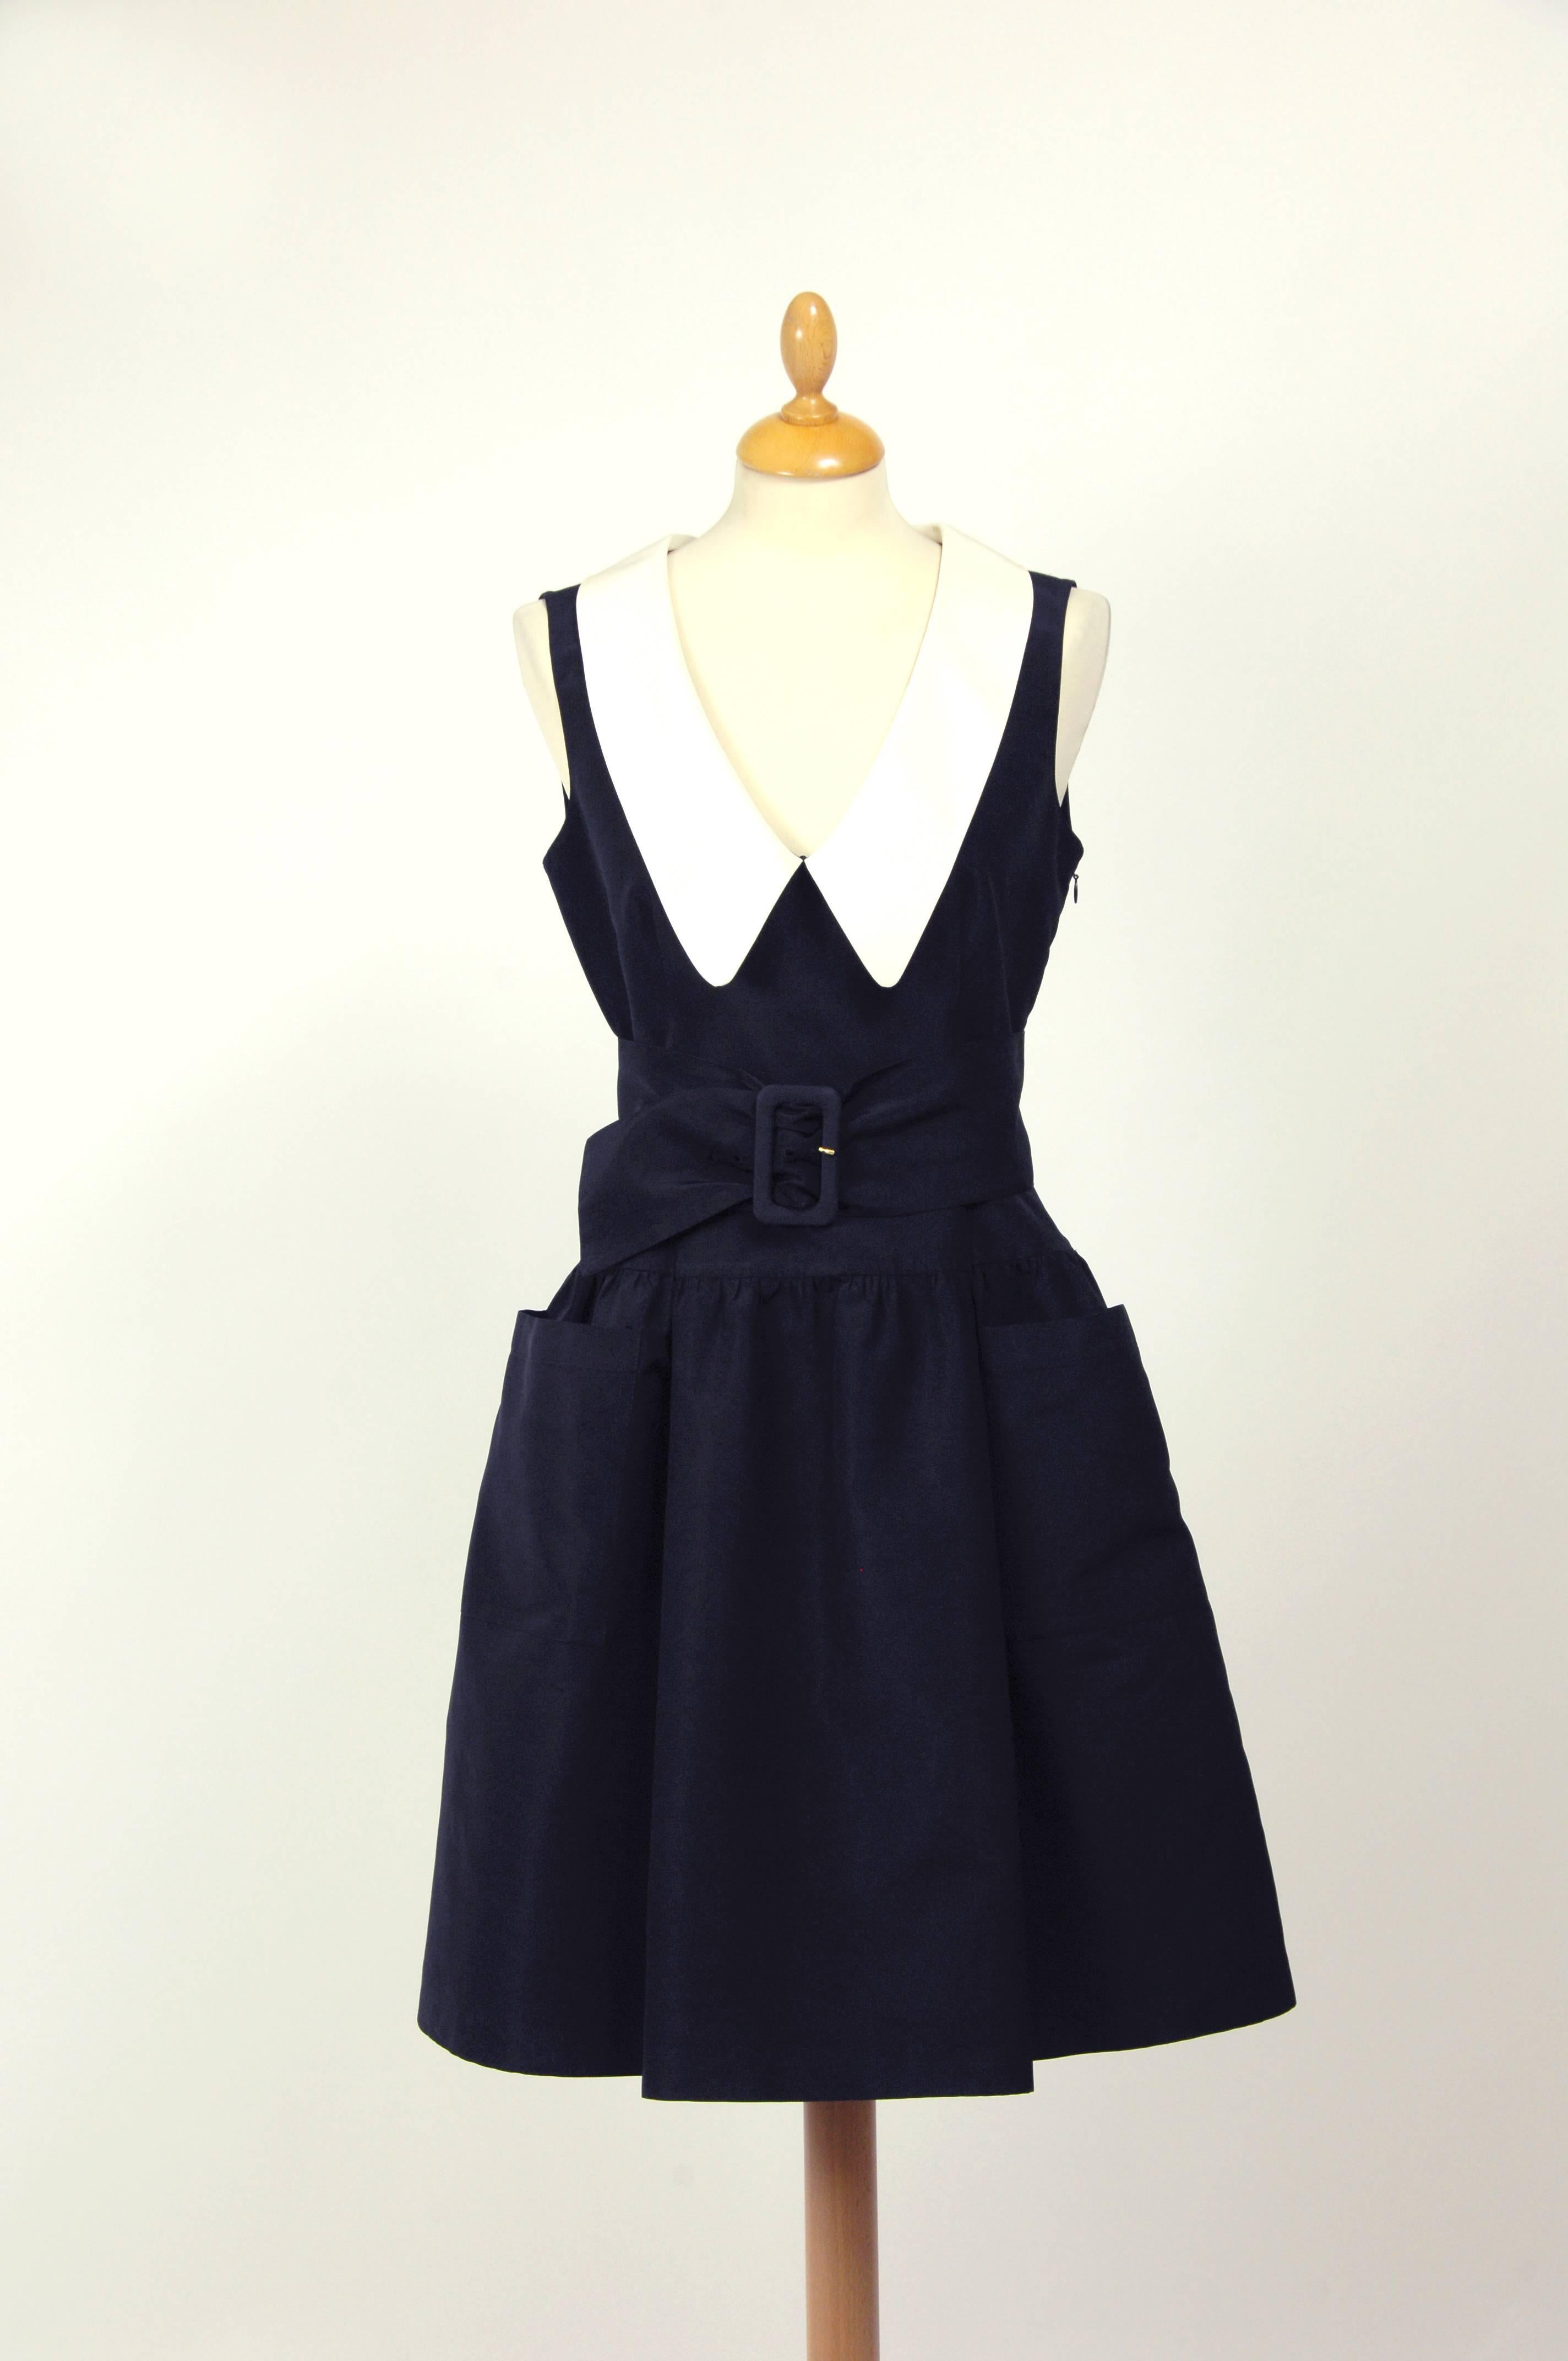 This lovely Prada dress is in a black silk taffeta fabric. It has white chelsea collar, side zip closure and buttons on the back, two frontal pockets.Belt included.

Measurements:
Label size 40(italian)
Estimeted size S
Shoulder free
Bust 34